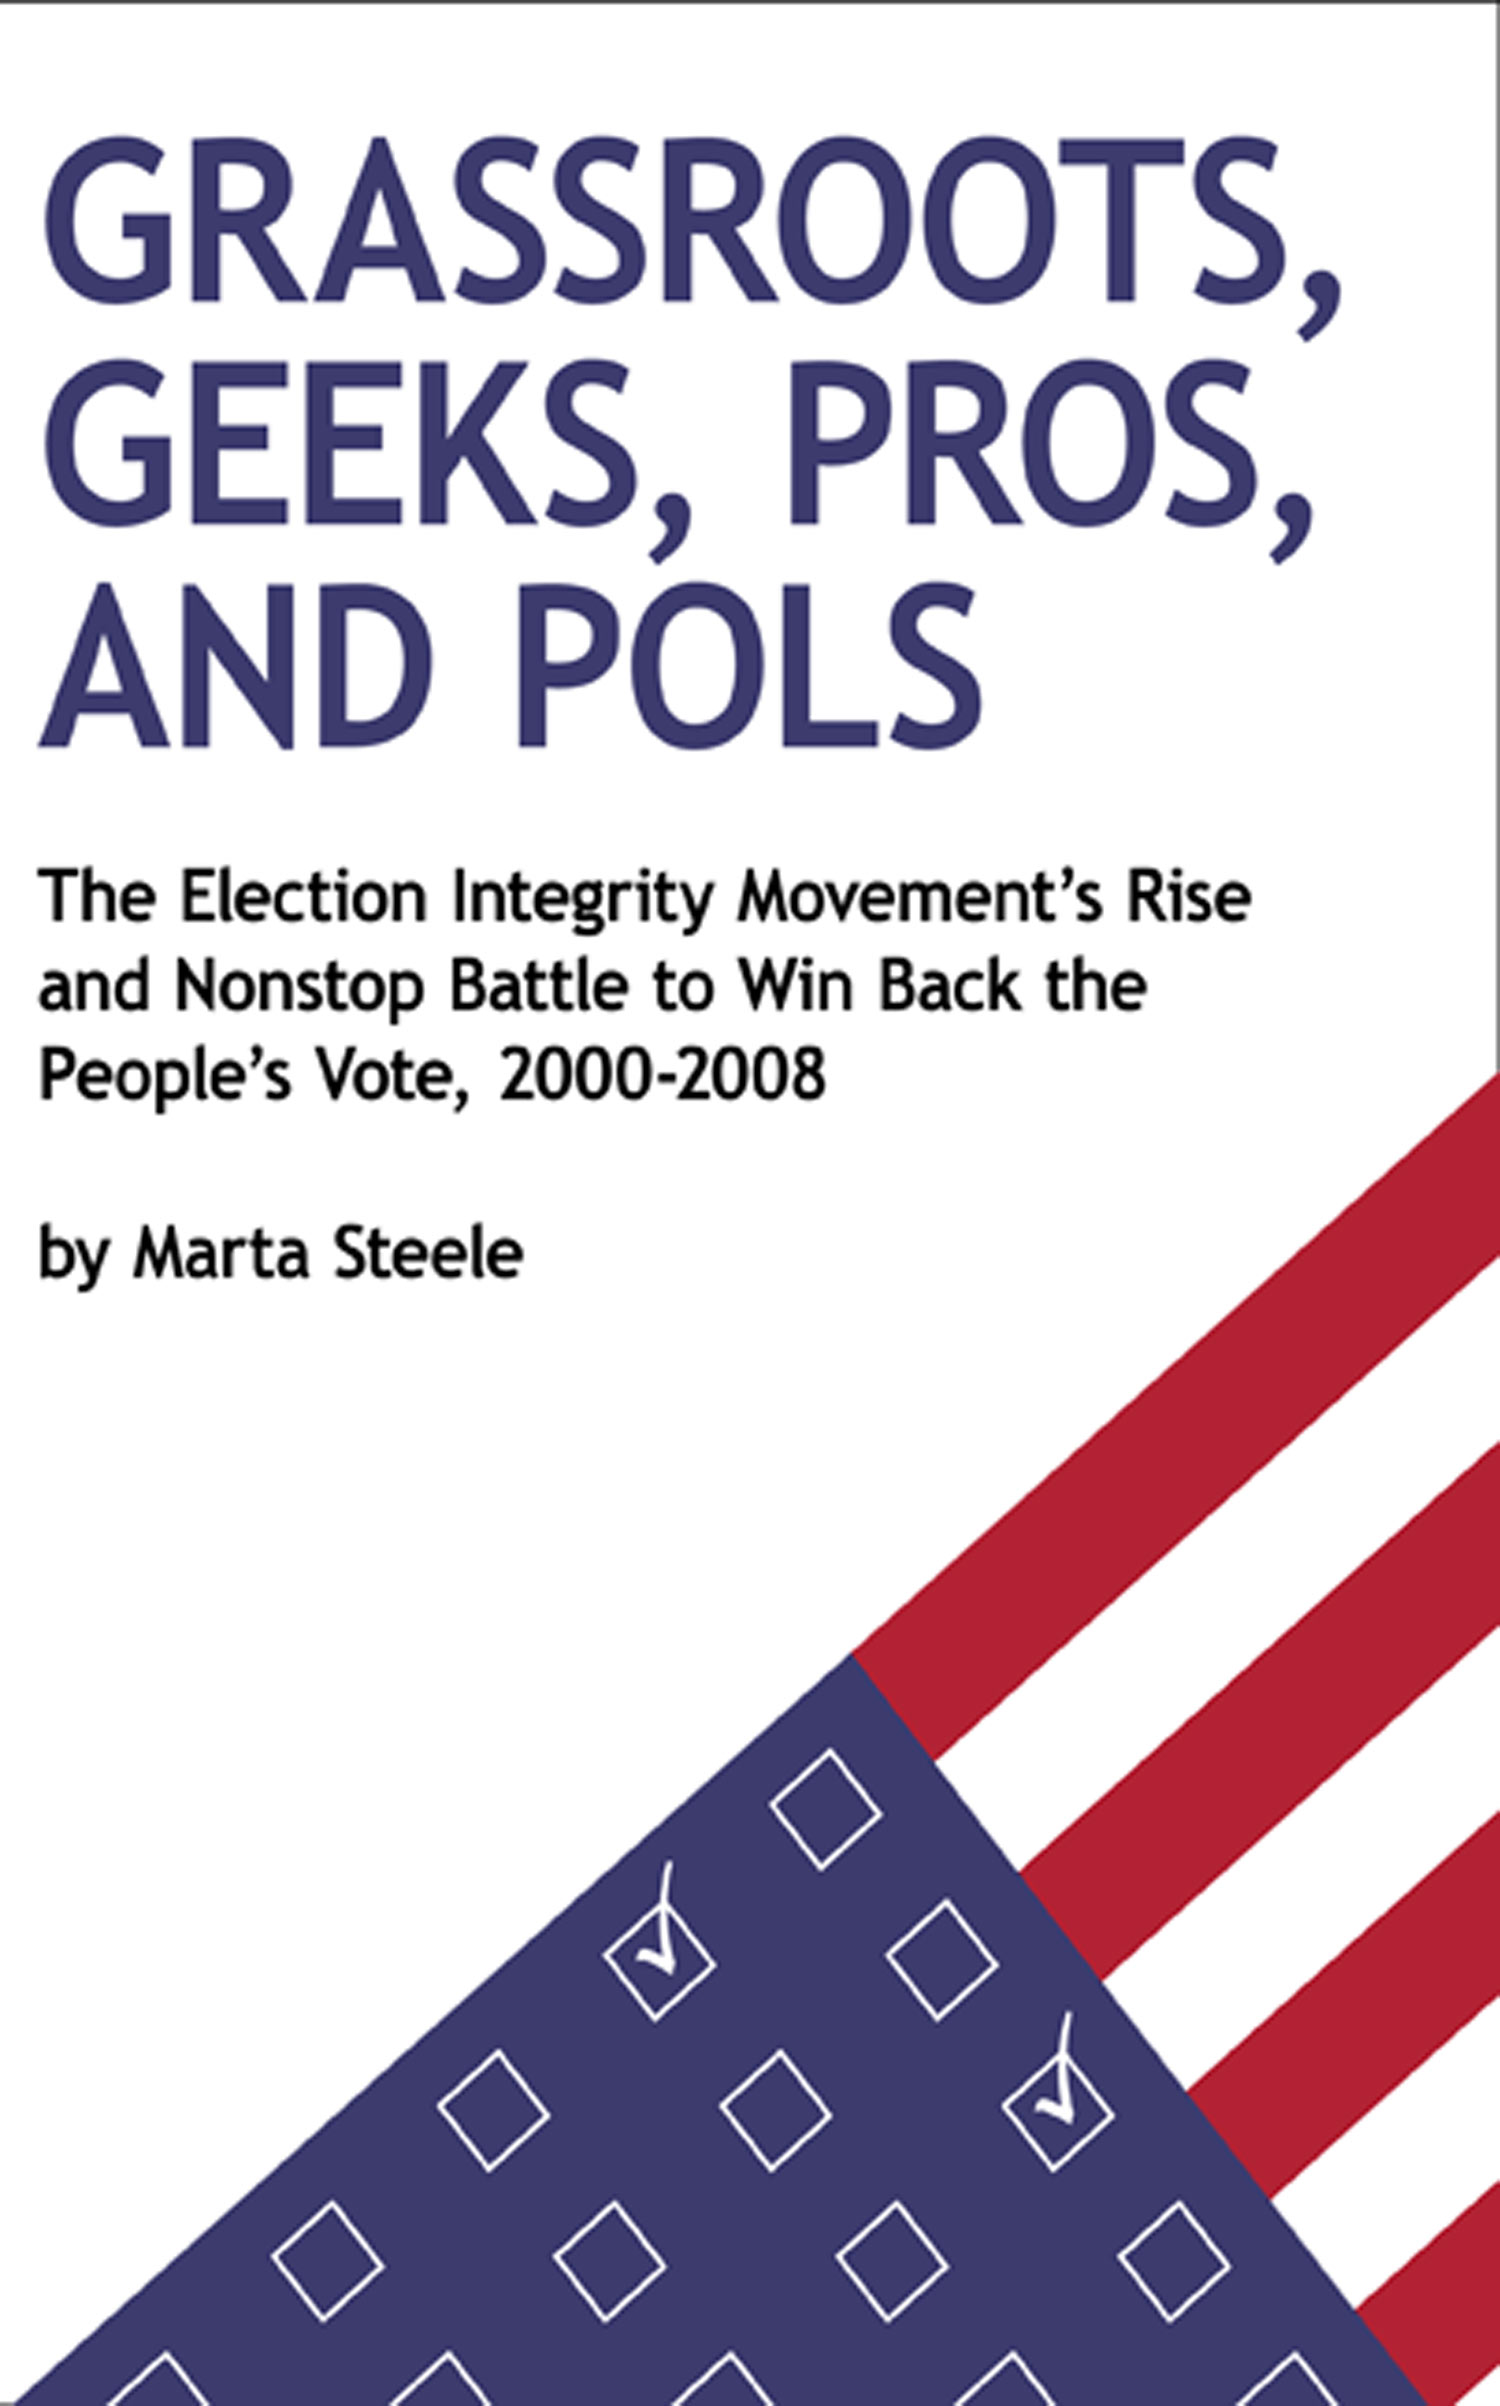 Grassroots, Geeks, Pros, and Pols by Marta Steele